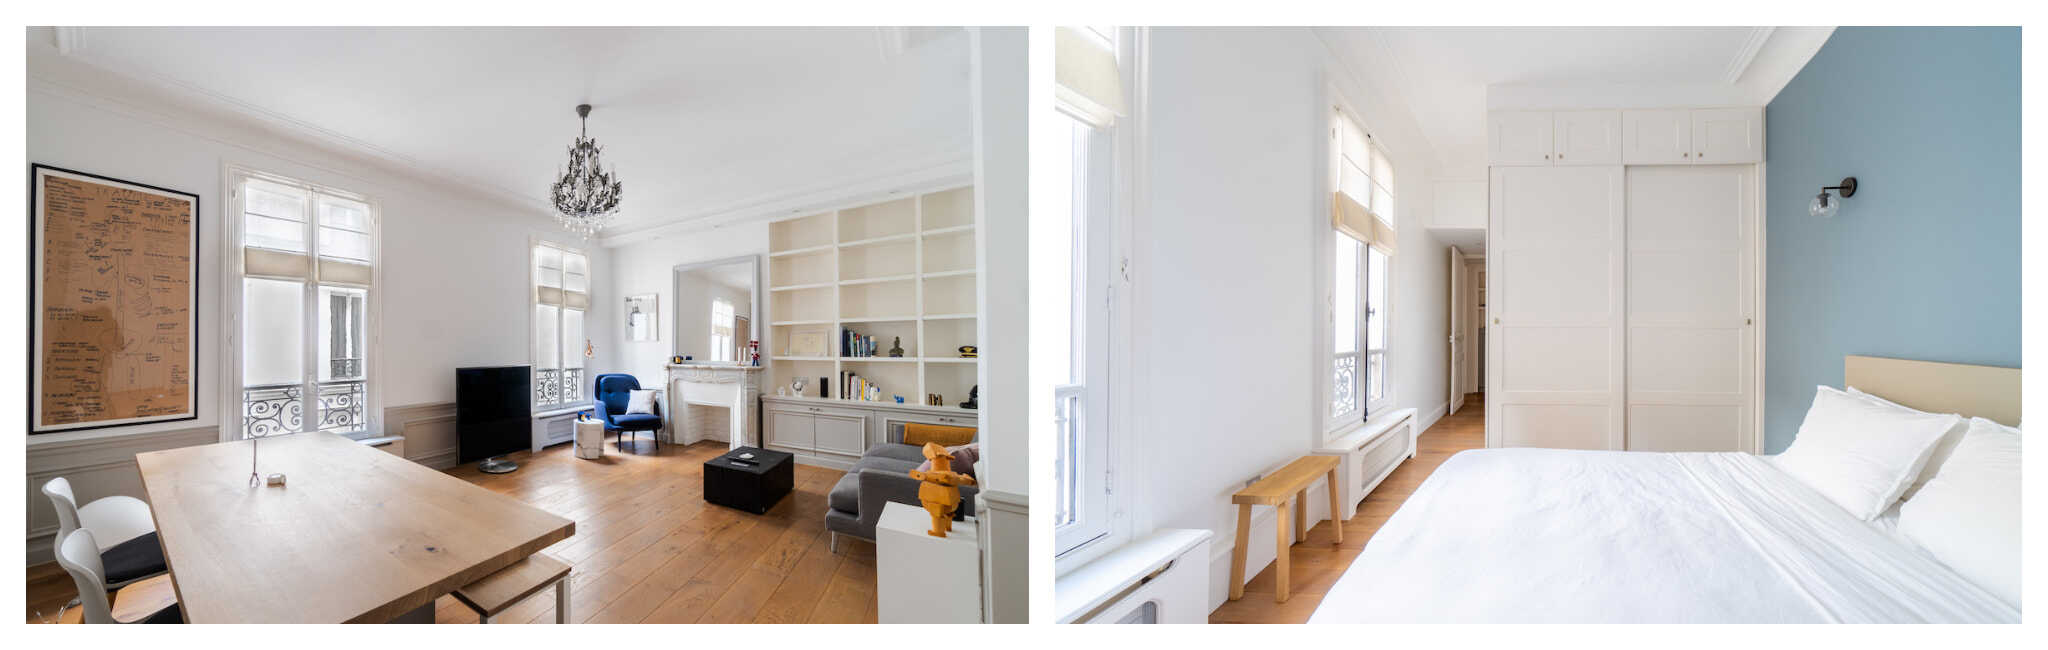 left: the bright airy living room of a Parisian apartment; right: the bedroom decorated in light colors with an abundance of natural light.